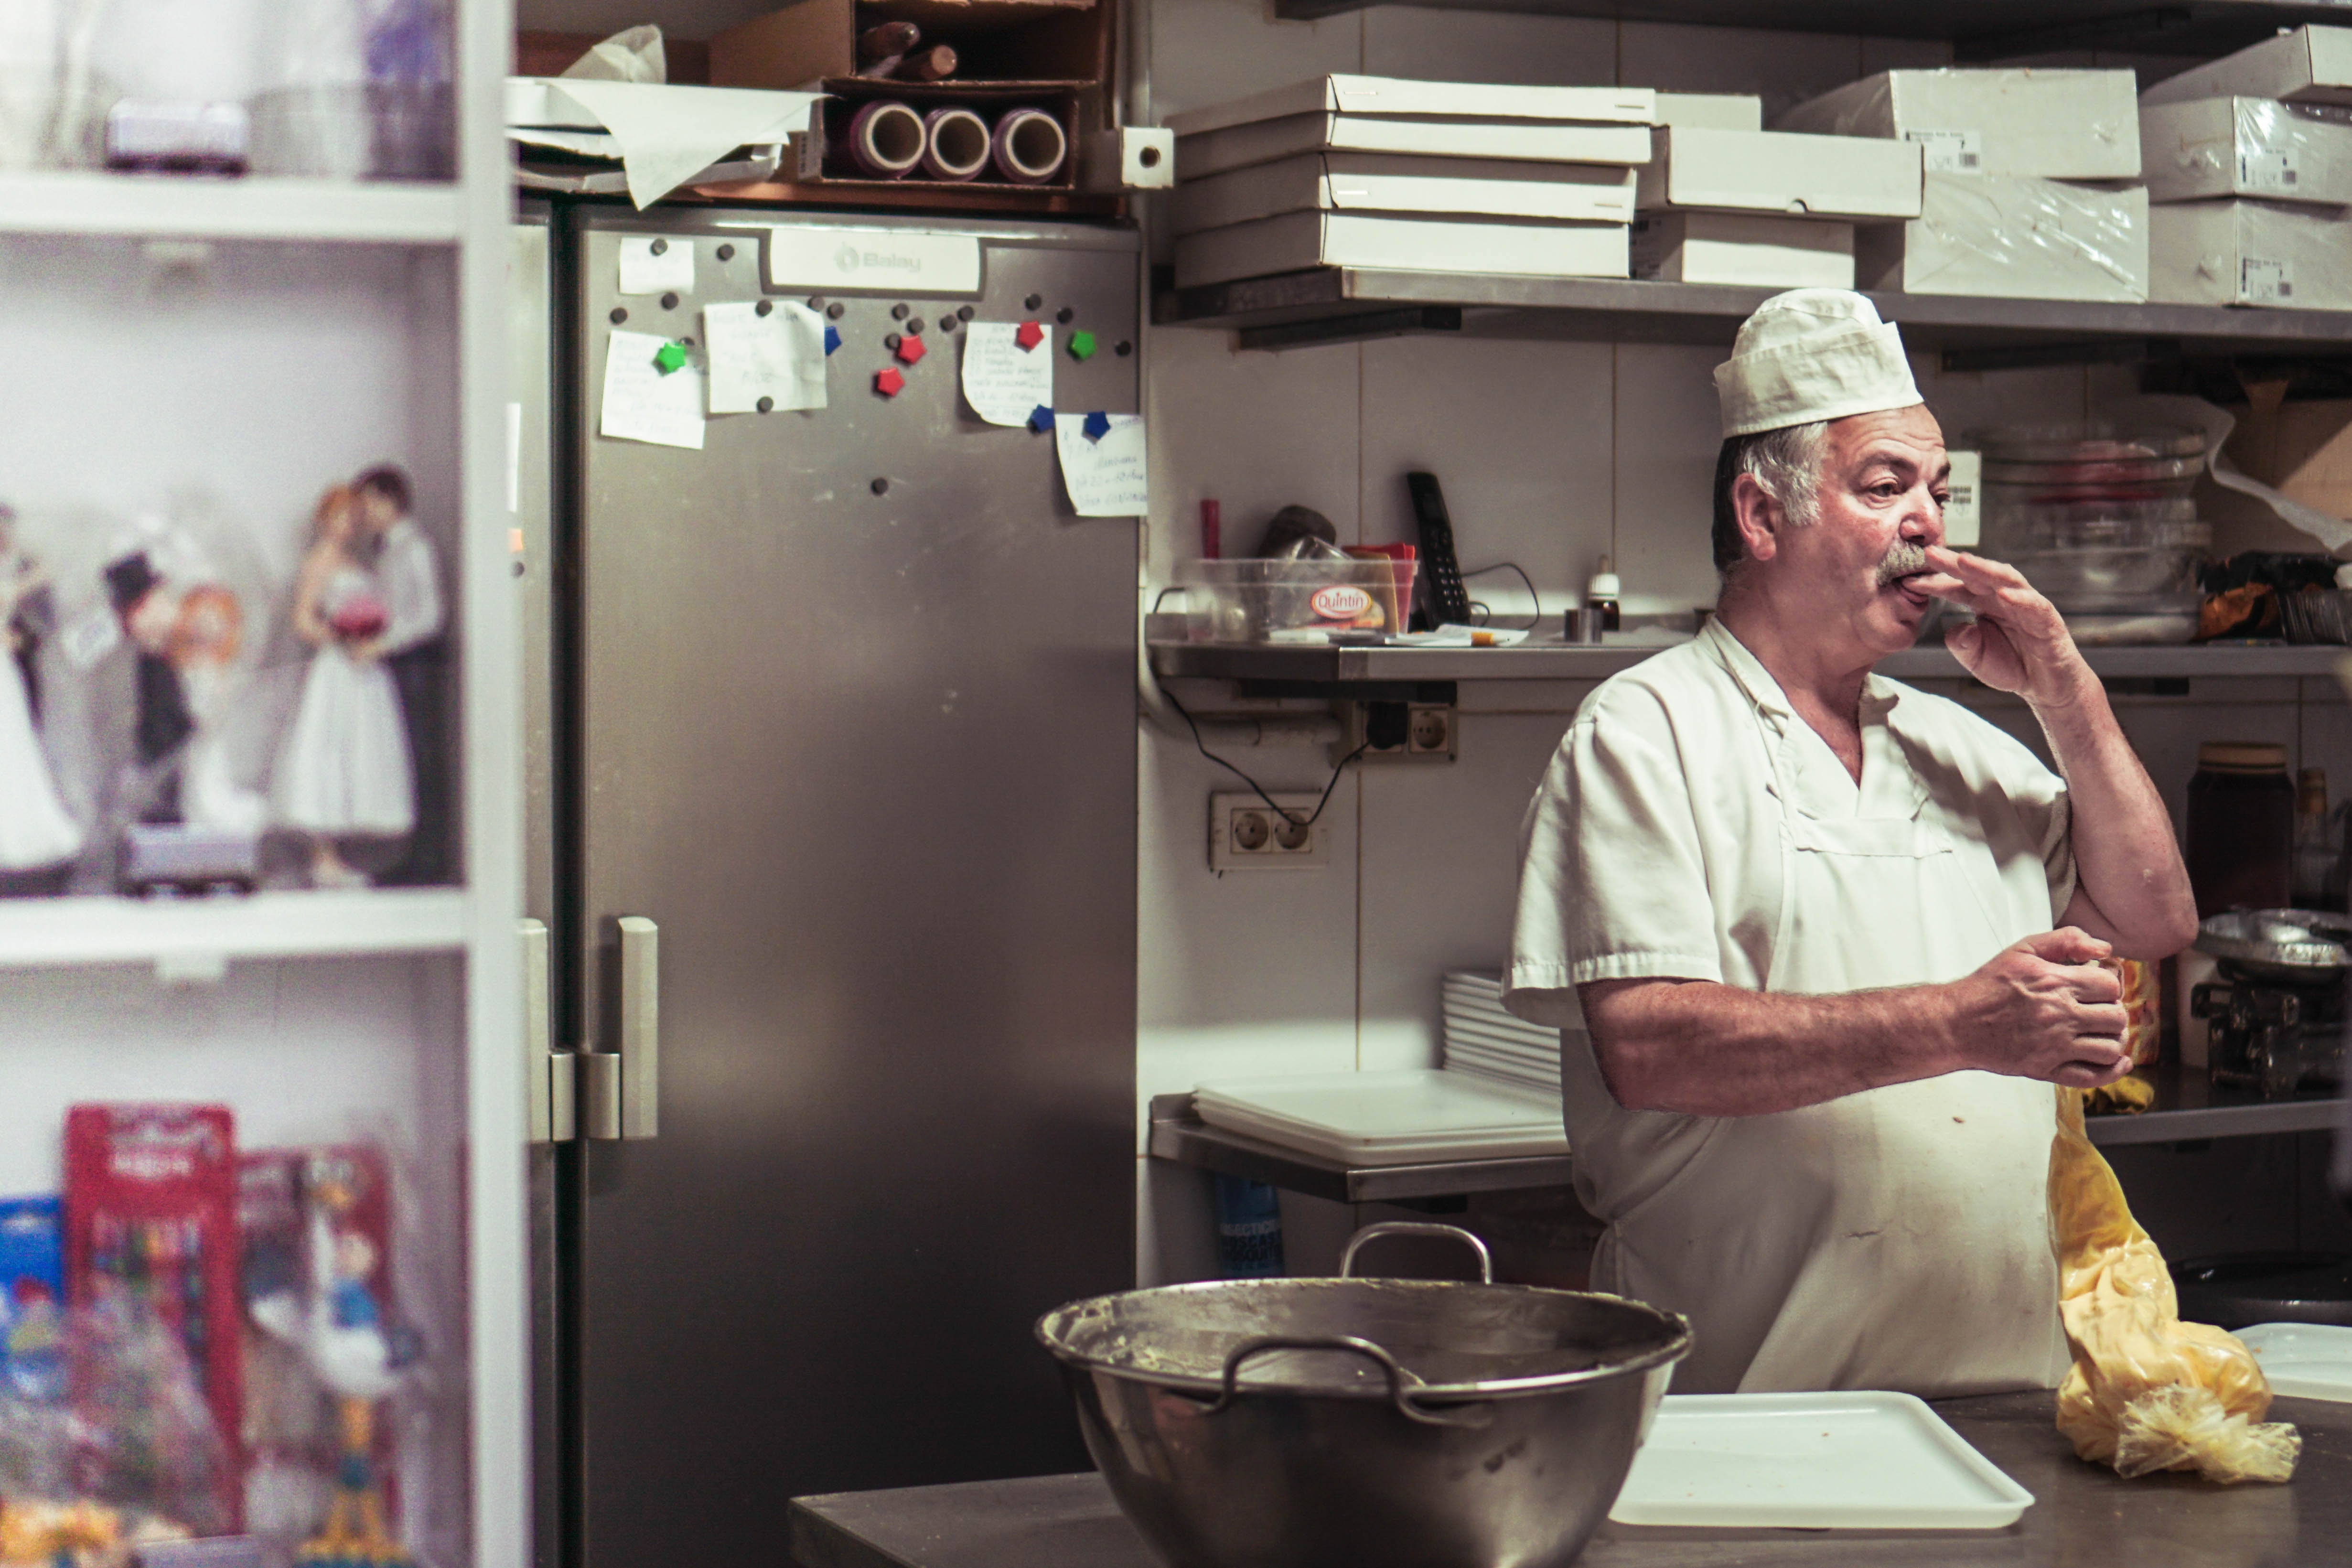 gray-haired chef with mustache in a bakery kitchen